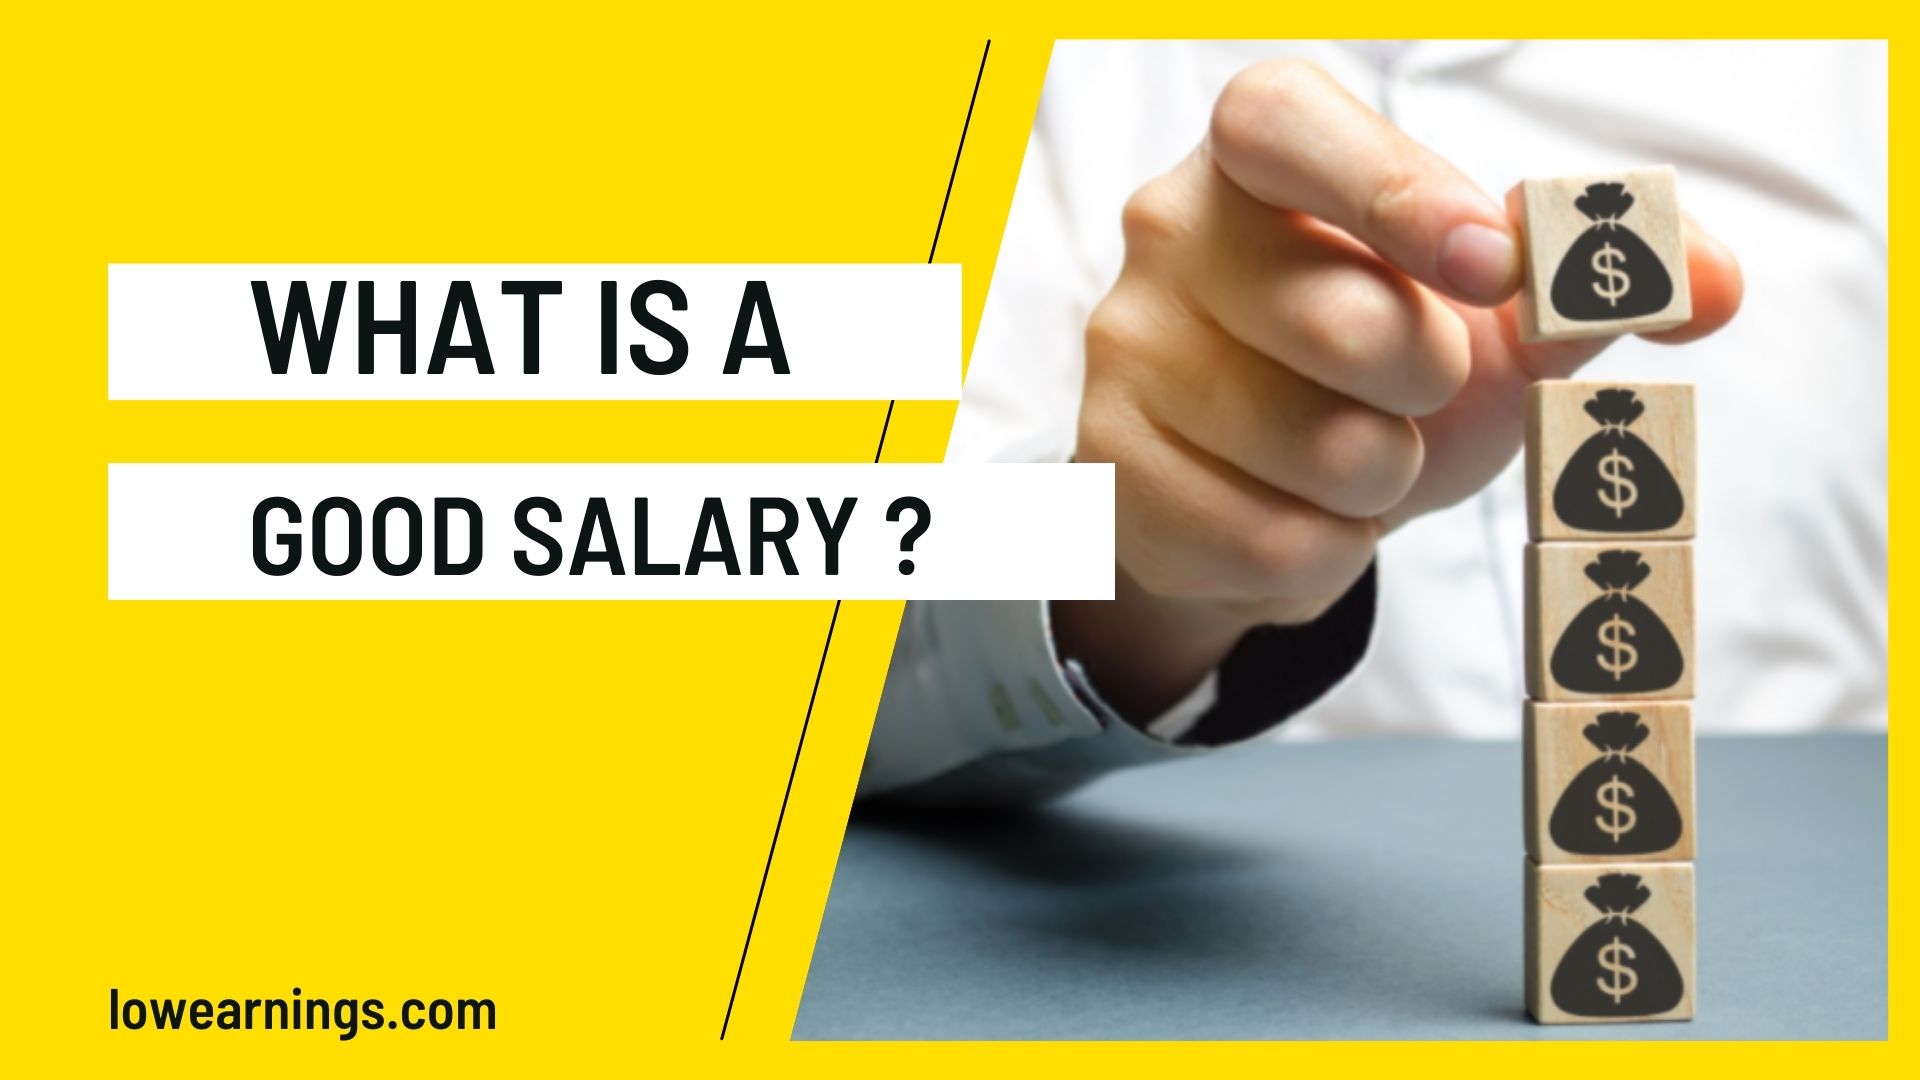 What is a good salary